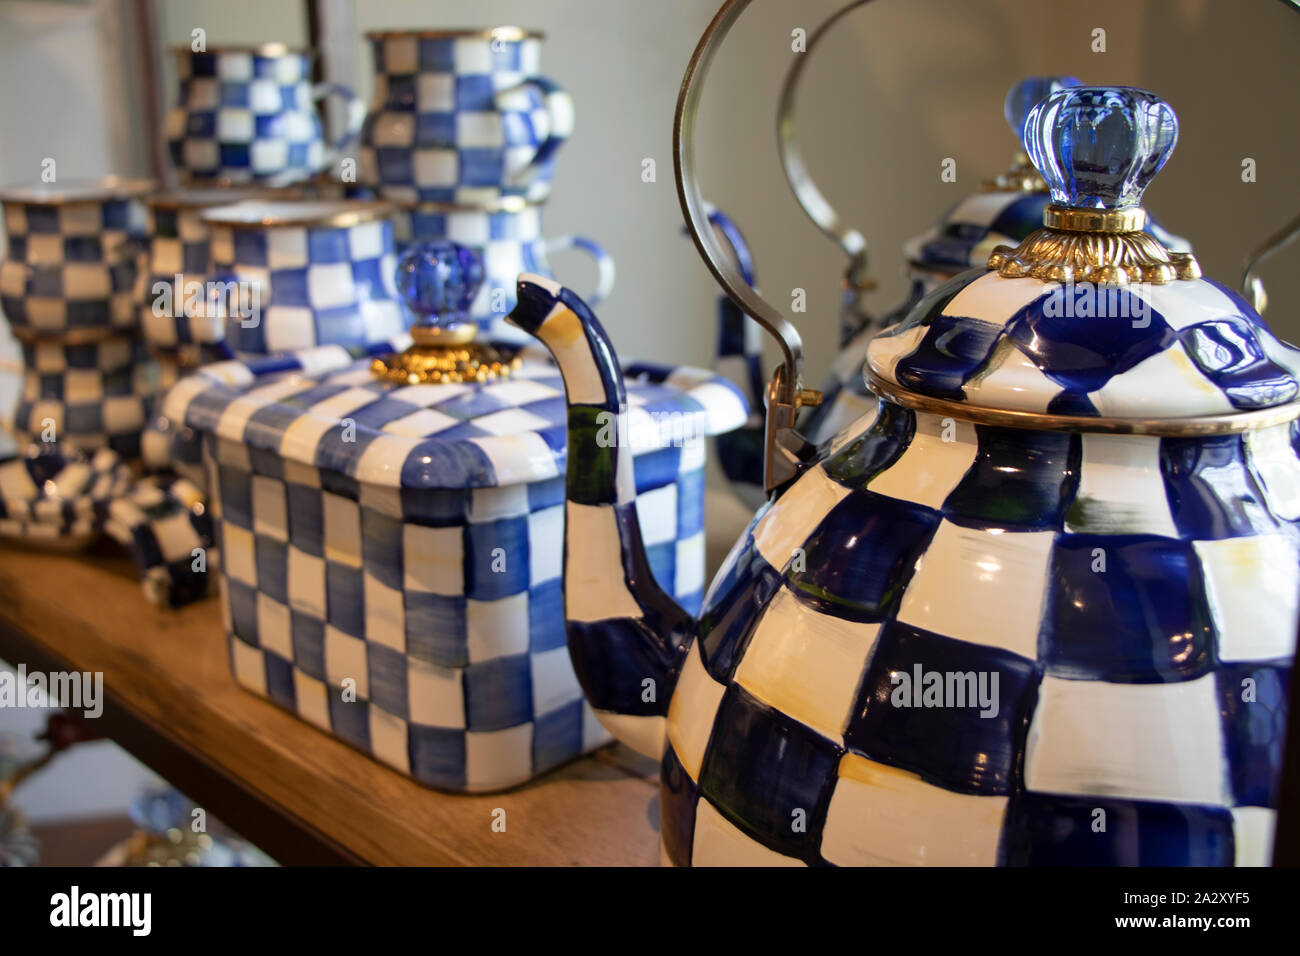 Aurora, New York, USA - July 27, 2019: Charming Blue and White Royal Check Enamelware Display at Mackenzie Childs shop, Finger Lakes, New York State Stock Photo